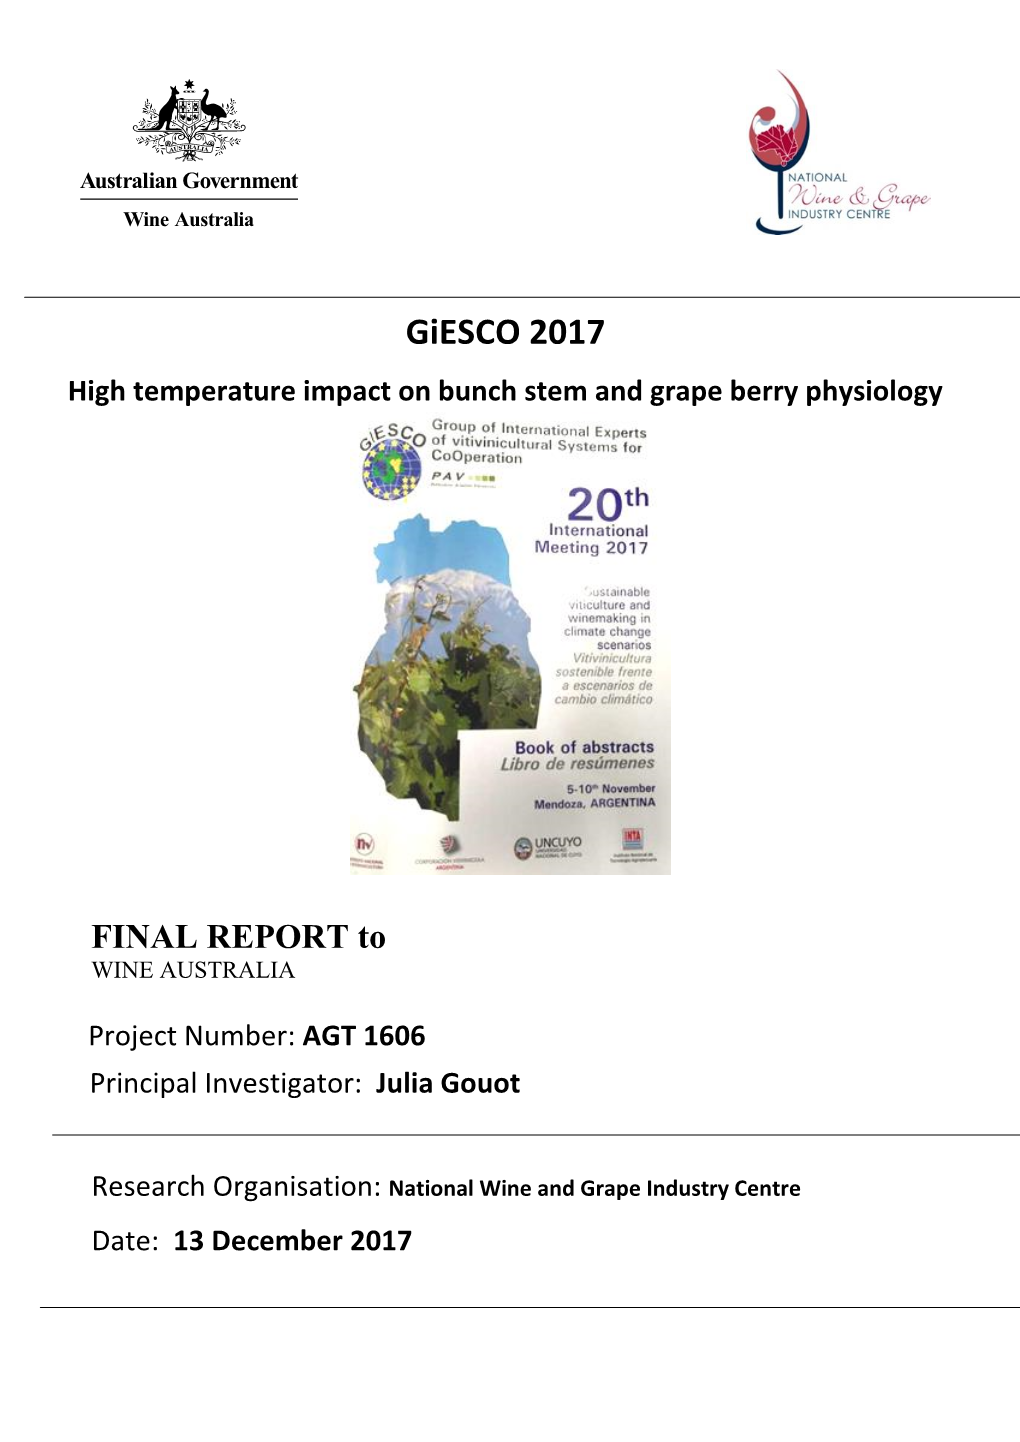 Giesco 2017 High Temperature Impact on Bunch Stem and Grape Berry Physiology